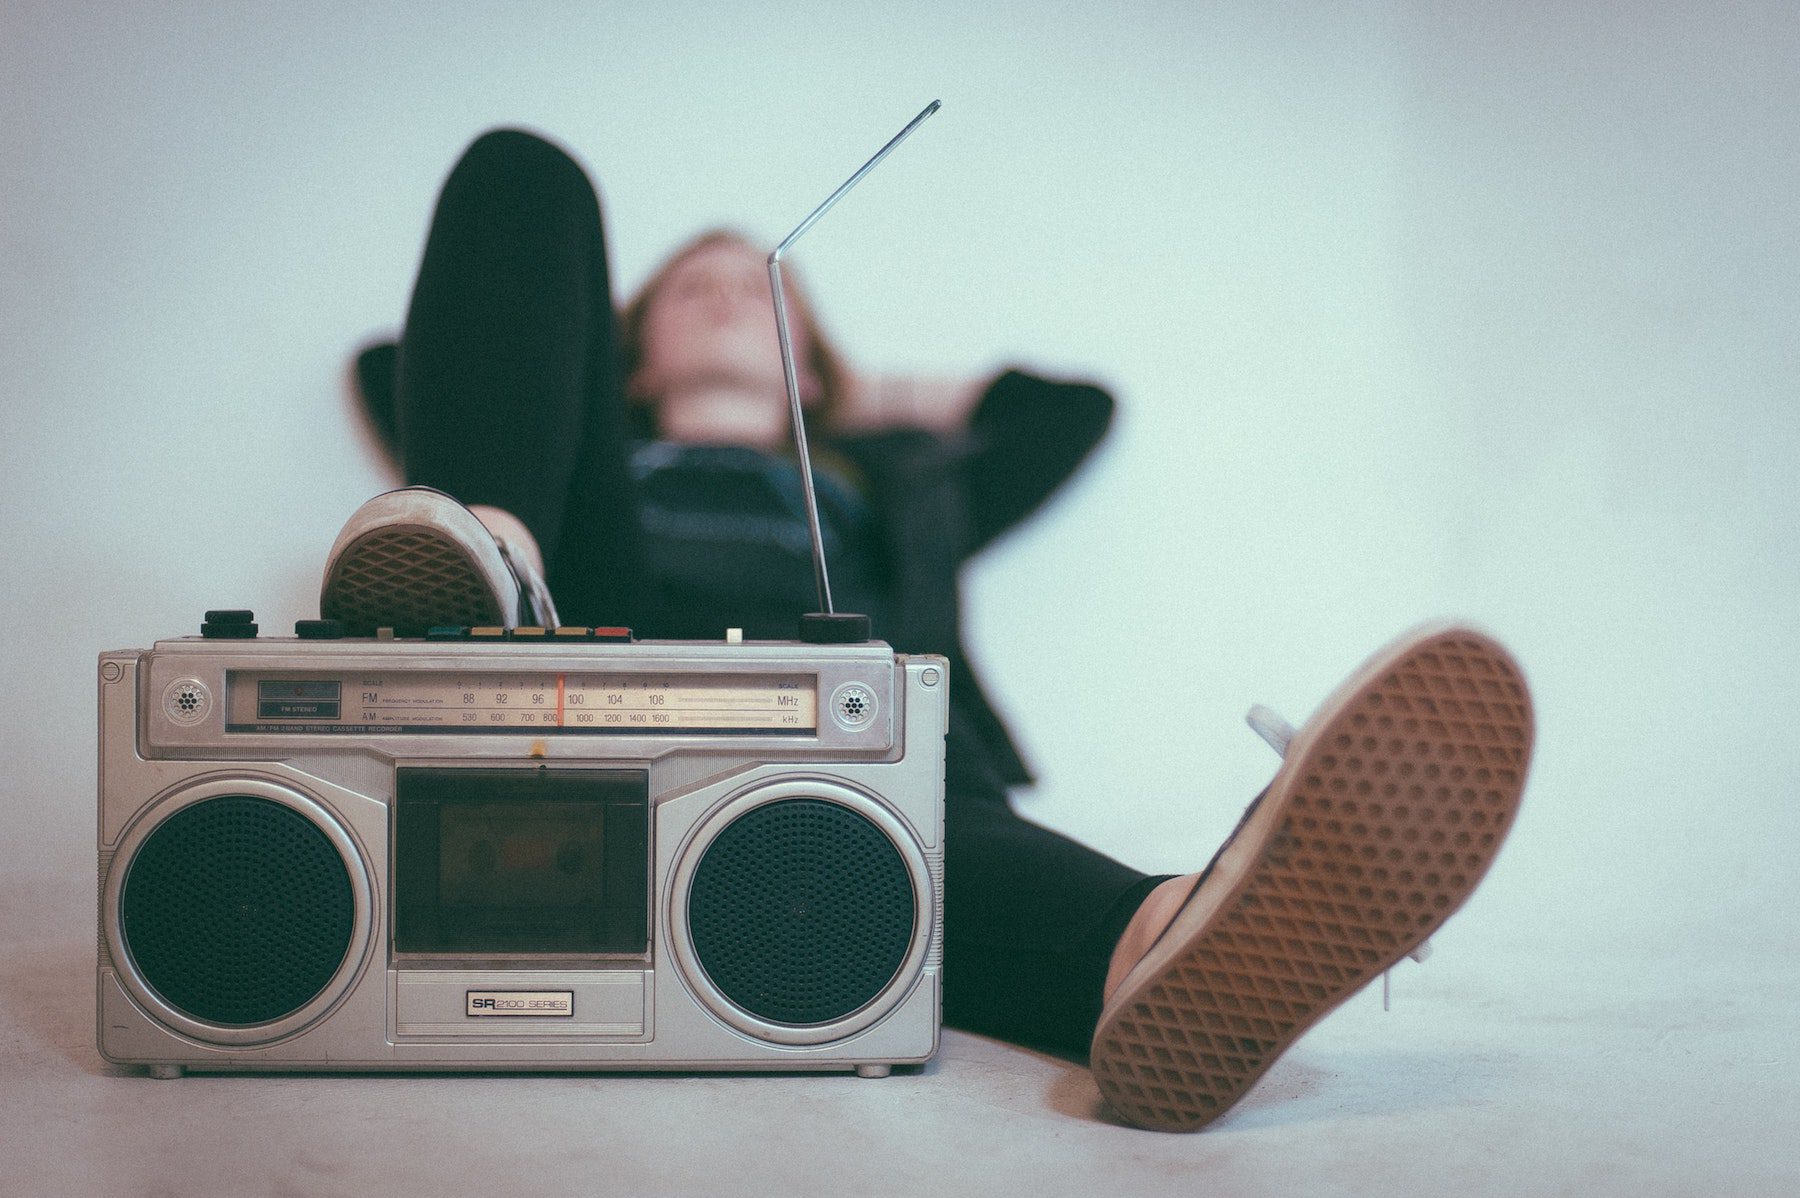 A girl wearing dark clothing laying back with her right foot up against on older style boombox radio